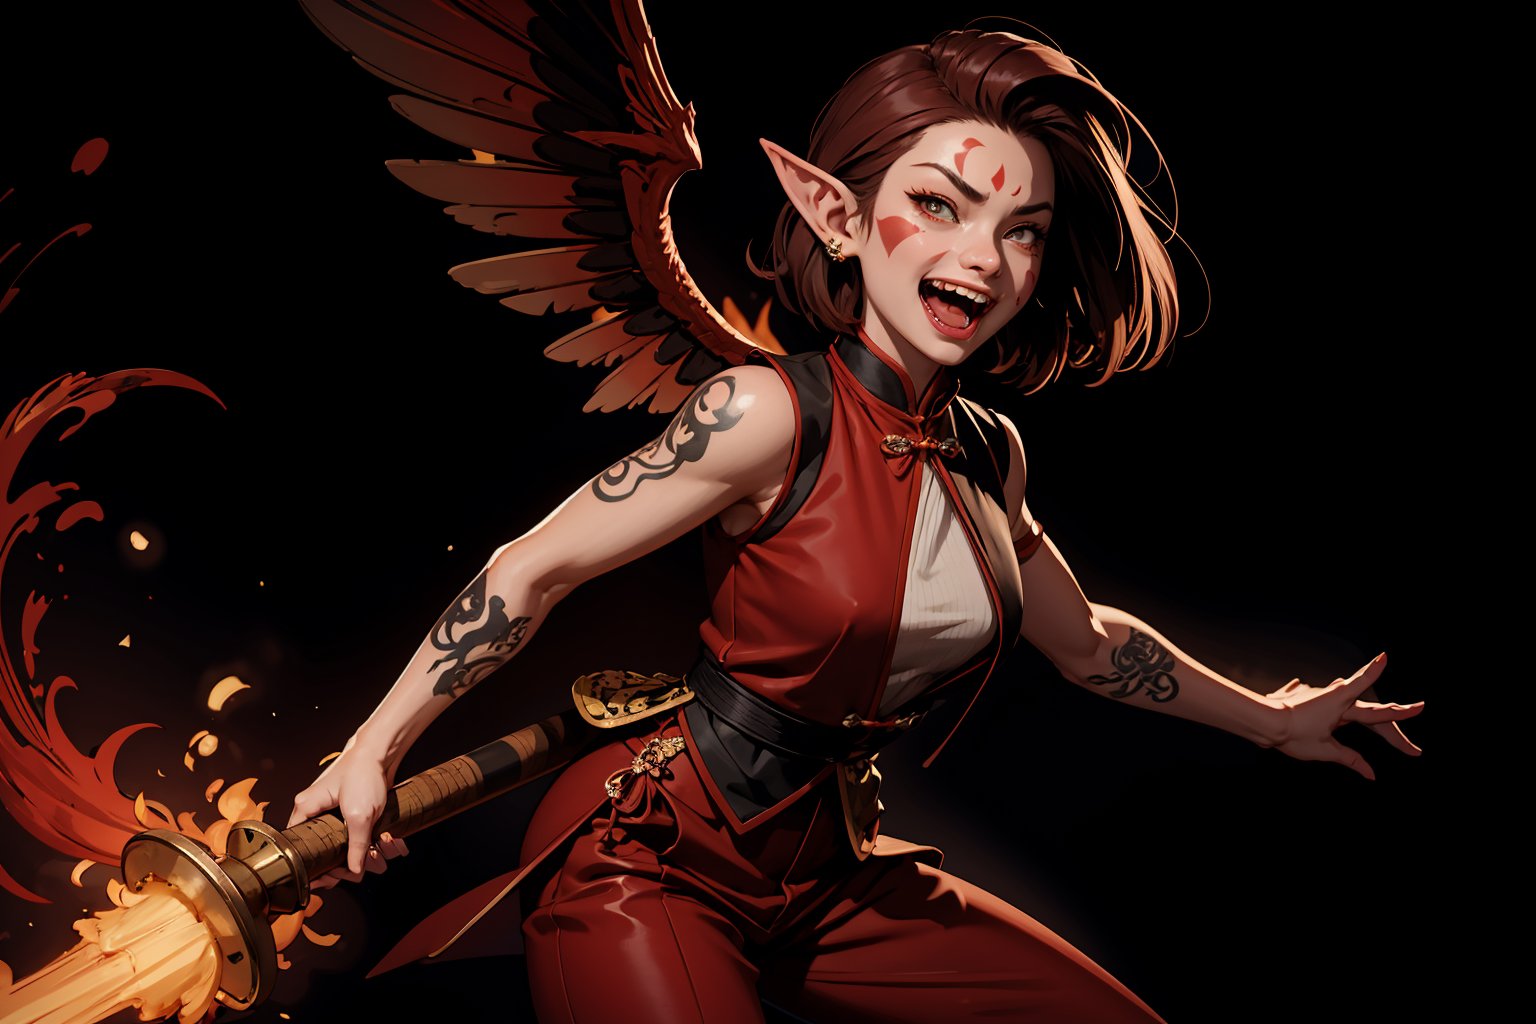 Chinese mythology, solo, 1female, monster_girl, short hair, dark red hair, (facial marks), fierce face, evil face, fangs, sexy lips, (pointed ears), (dark skin), strong body, (phoenix tattoo), (a single wing behind:1.2), (roar with laughter:1.2), dark red vest, long pants, holding a mace, Chinese martial arts animation style